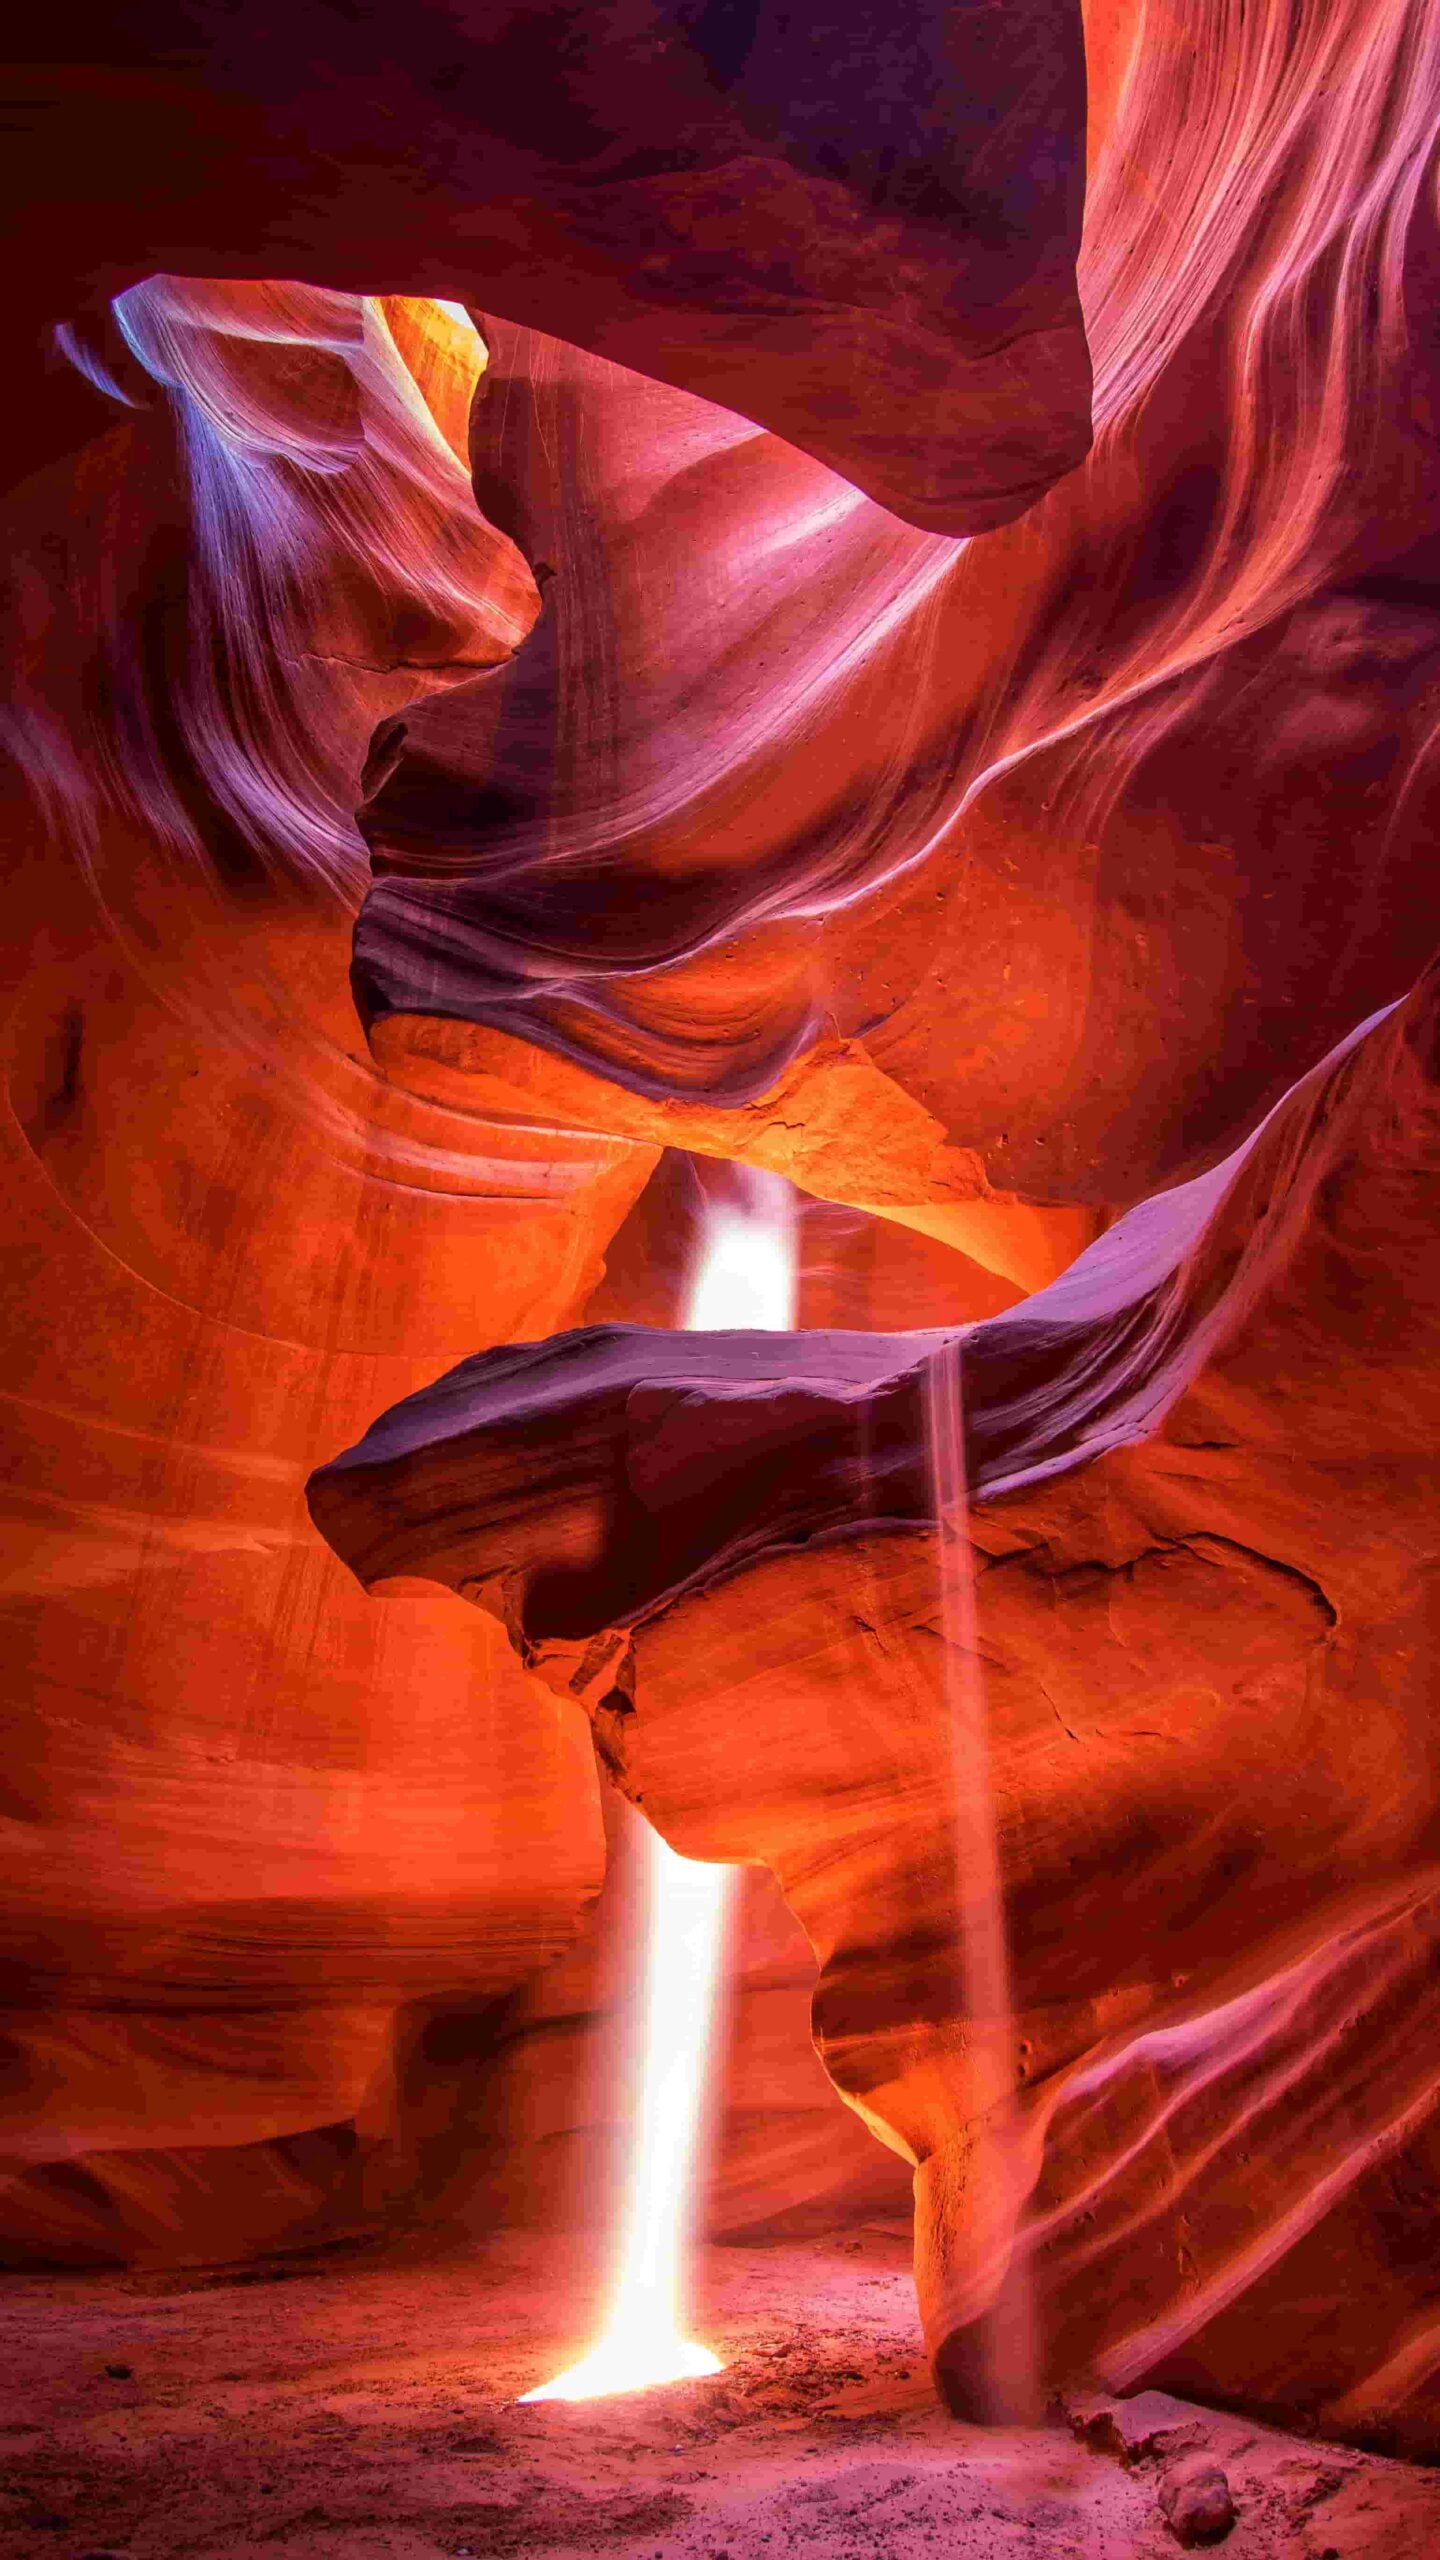 The beams of direct sunlight radiating down from the openings of Upper Antelope Canyon